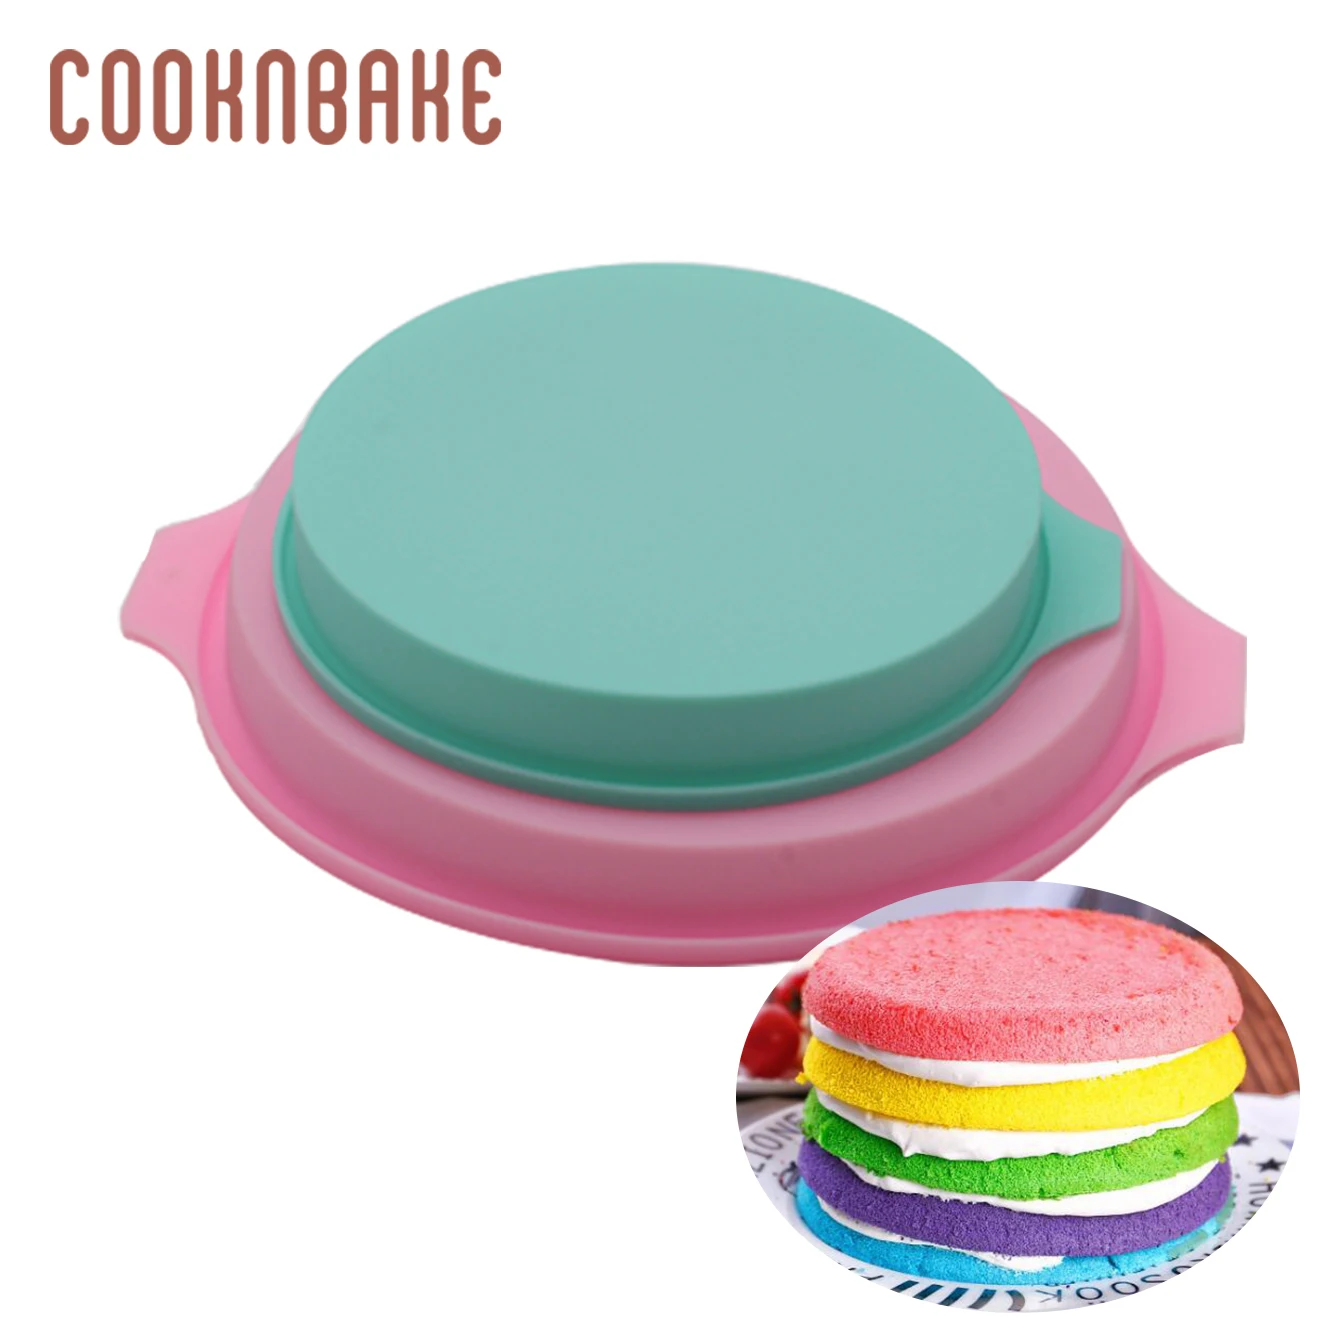 COOKNBAKE Silicone Mold for 8 inch Round Pizza Pastry Rainbow Cake Bread Baking Tool Cake Decoration DIY Birthday Party Set of 4 